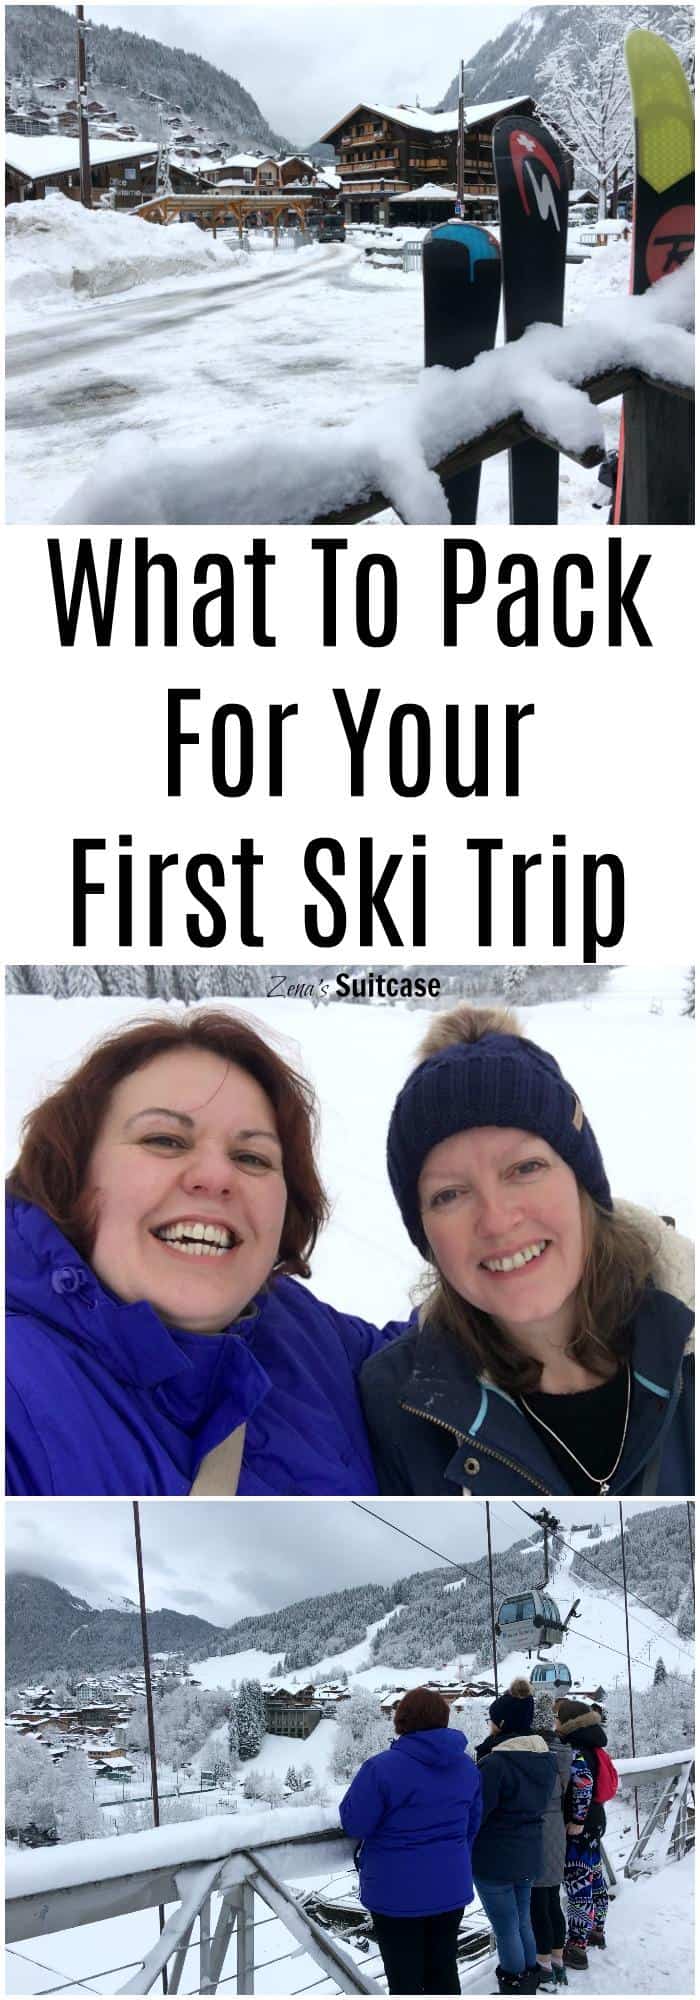 What to pack for your first ski trip or holiday #skiholiday #skiwear #skiclothes #skigear